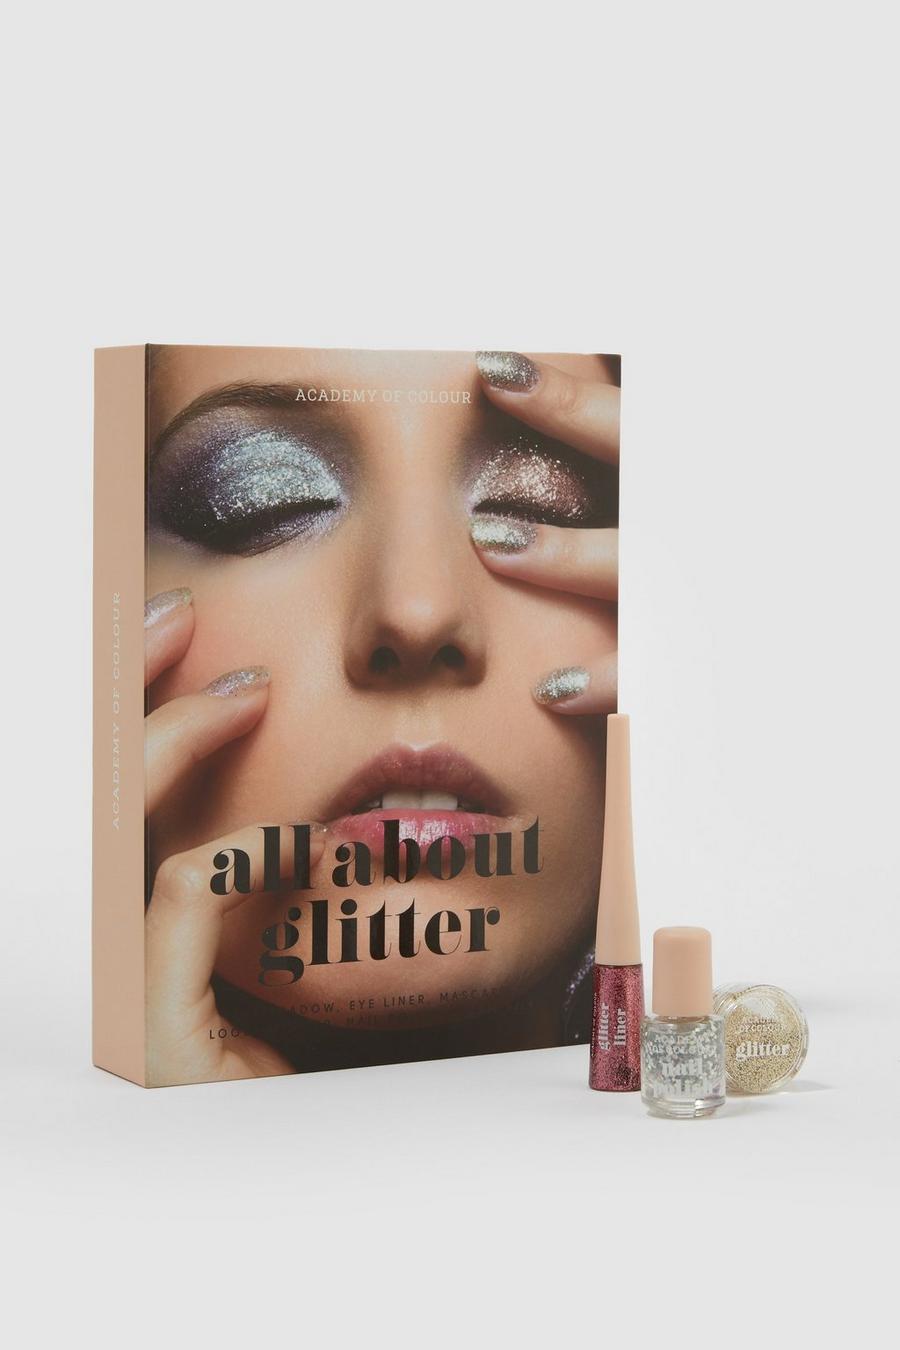 Academy Of Colour Glitter Look Book